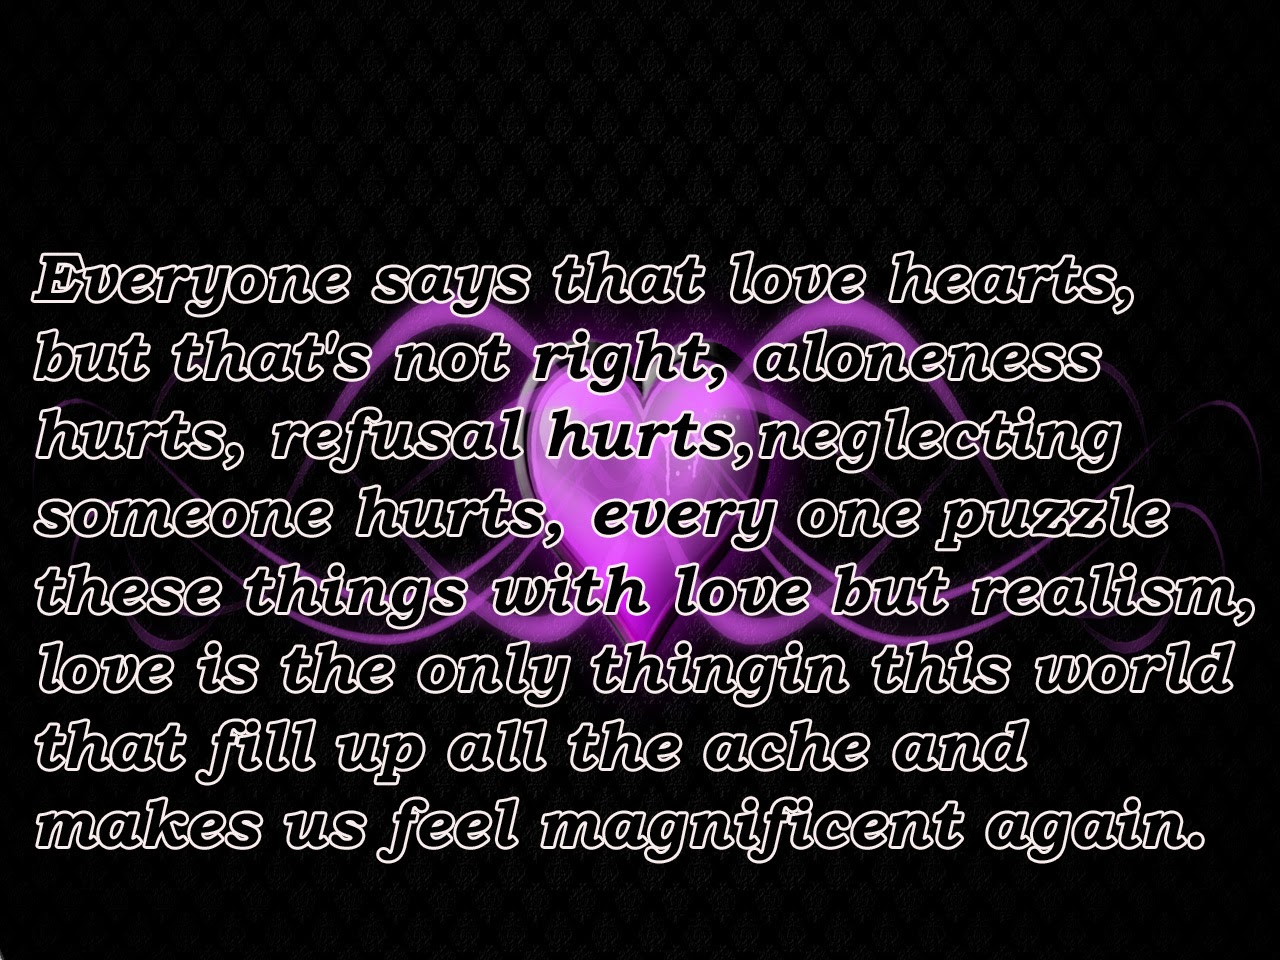 "Everyone says that love hearts but that s not right loneness hurts